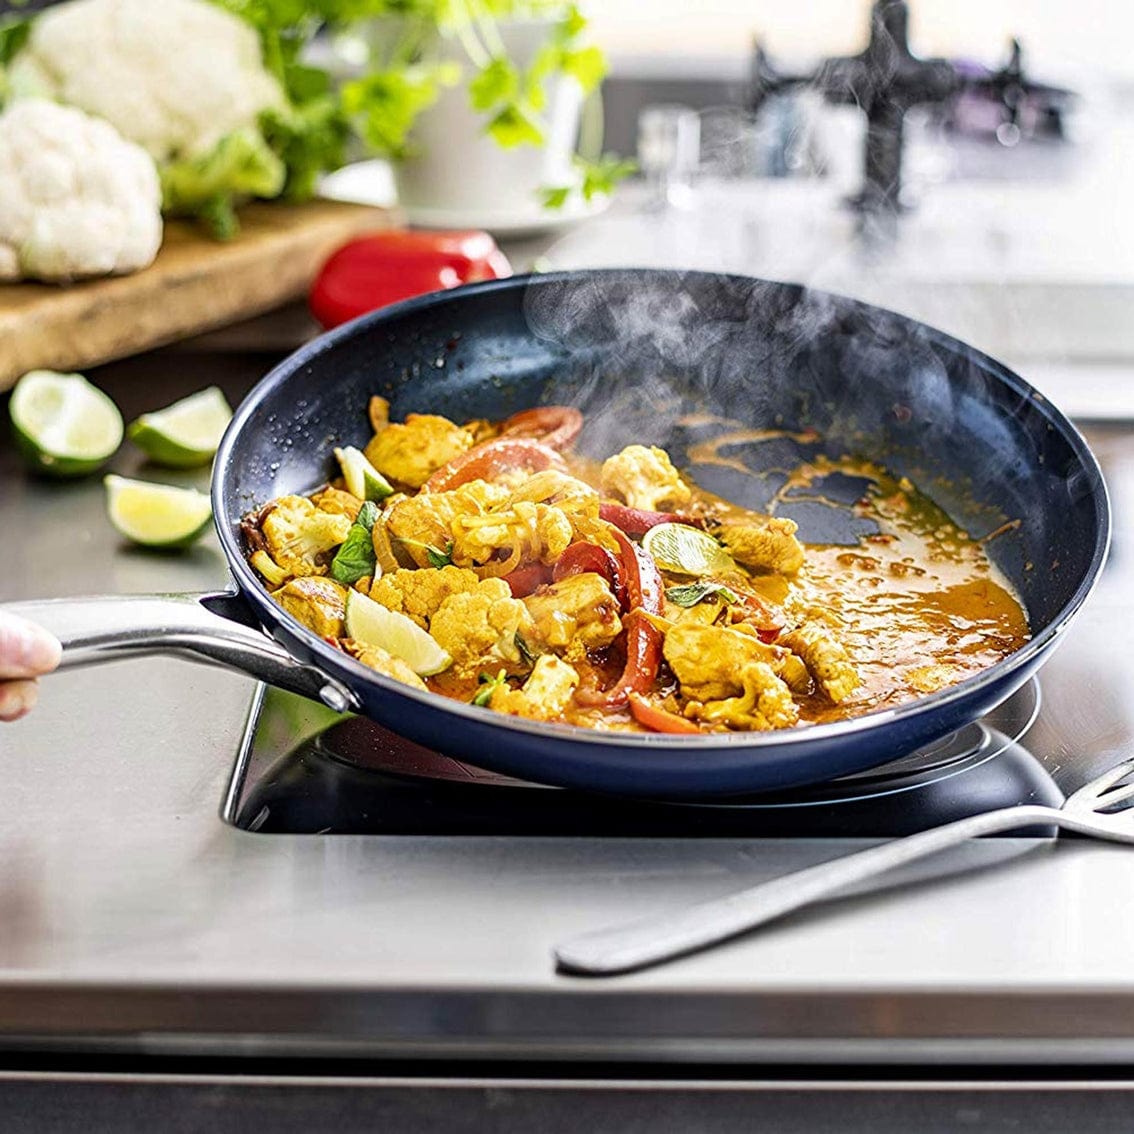 The Blue Diamond 8-Inch Nonstick Skillet Is on Sale At